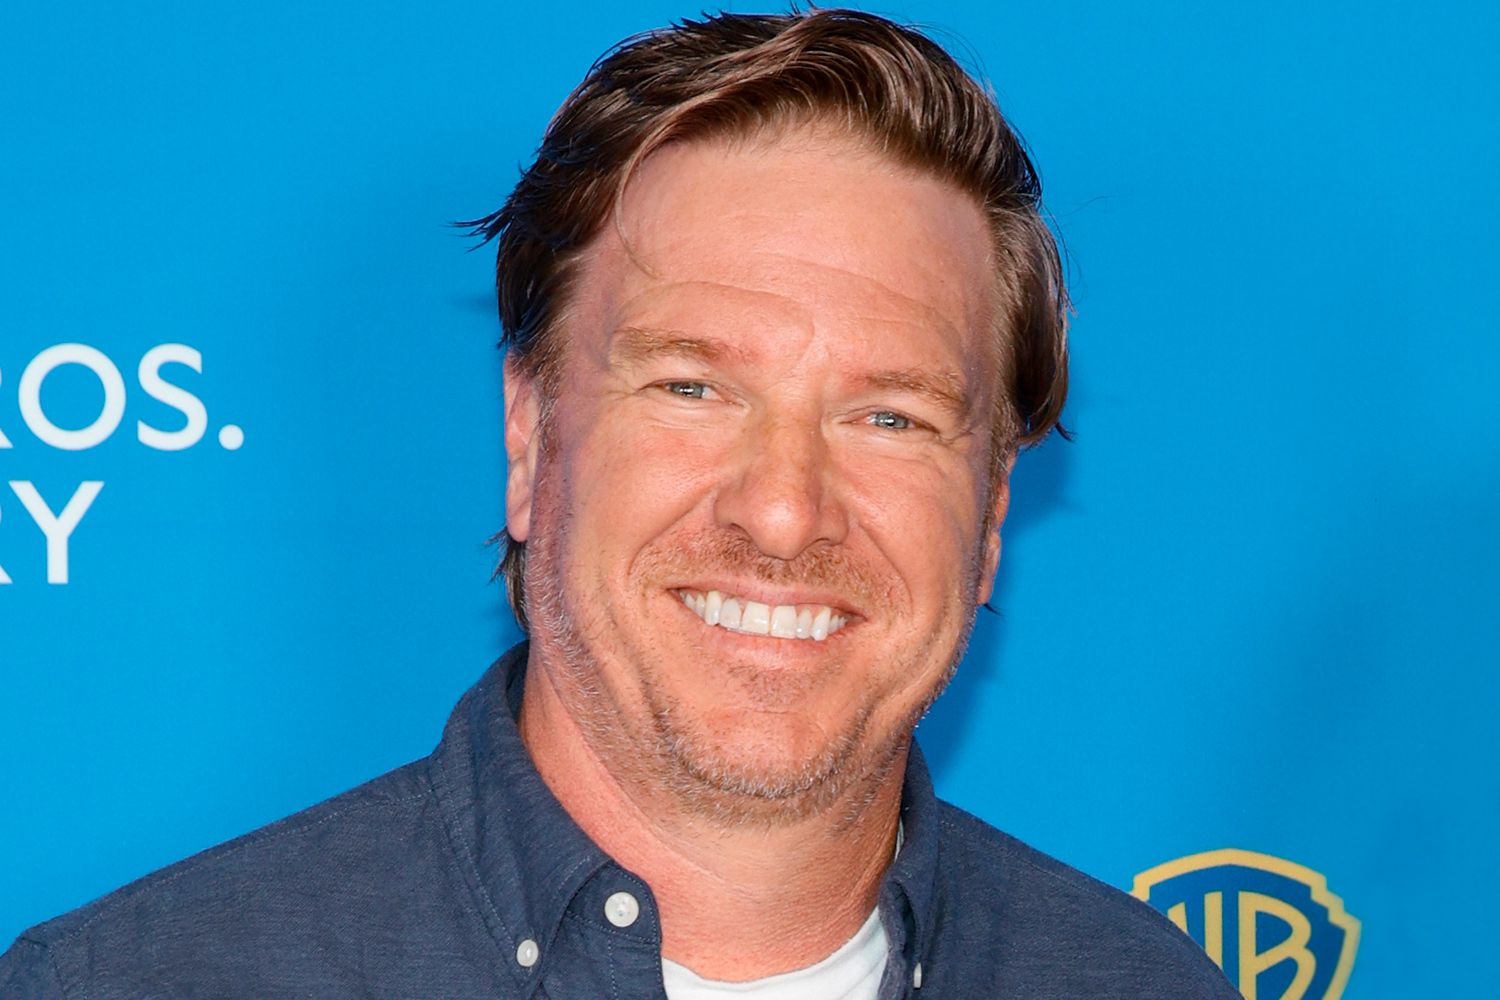 Chip Gaines, Fixer Upper on Magnolia and Joanna Gaines, Fixer Upper on Magnolia attend the Warner Bros. Discovery Upfront 2022